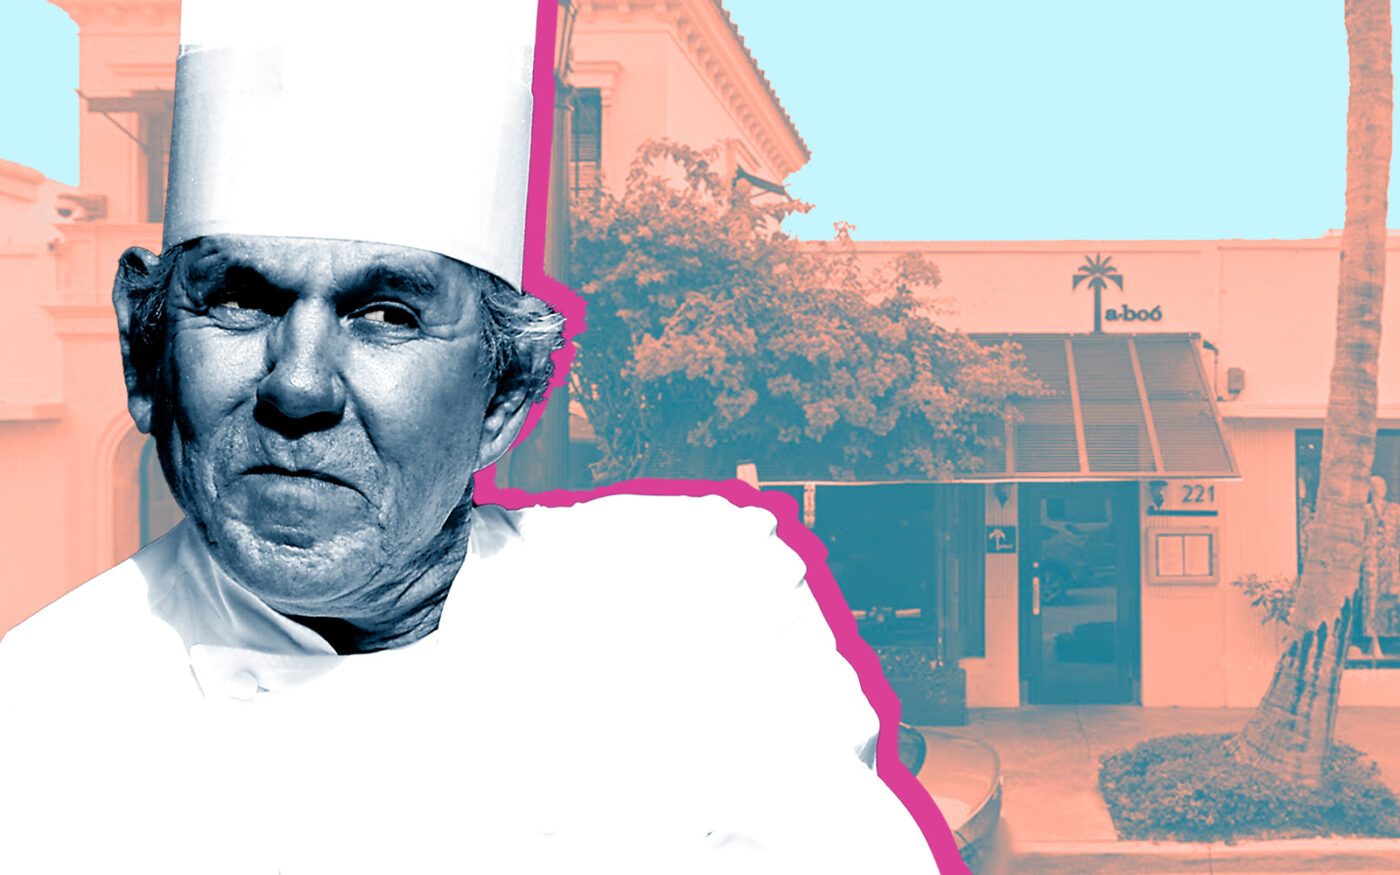 Chef Thomas Keller and 221 Worth Avenue in Palm Beach